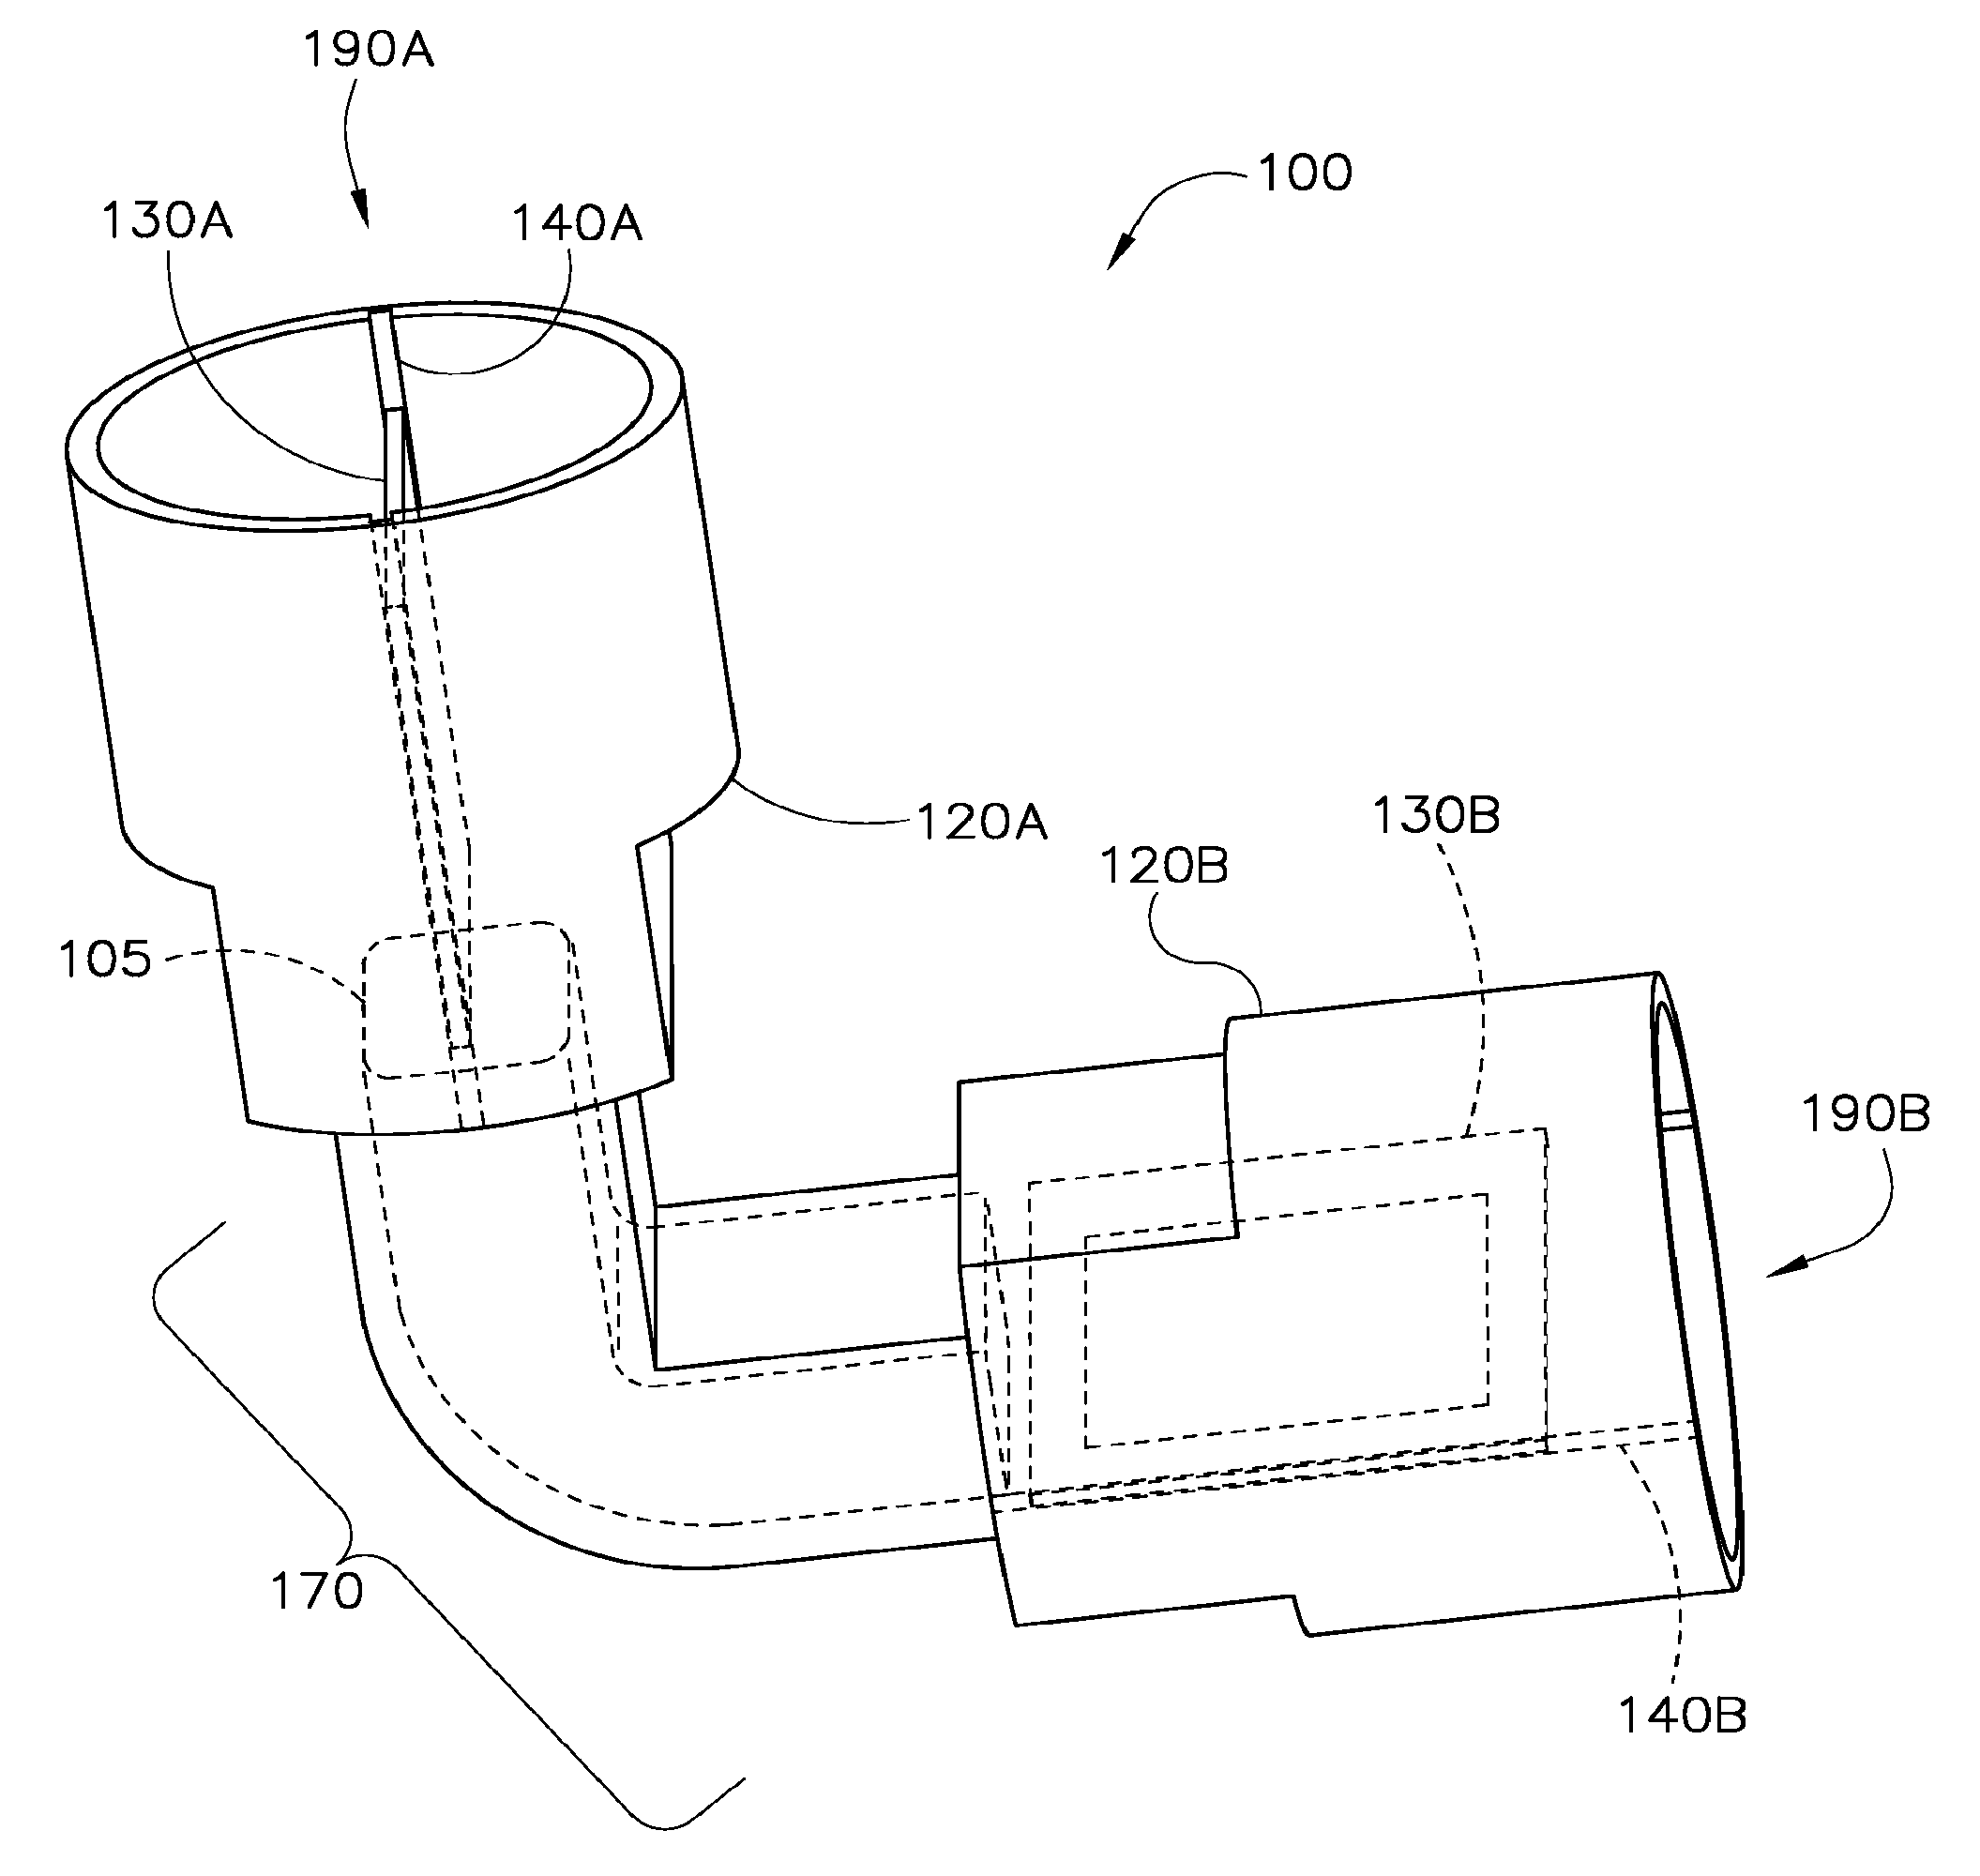 Circular to rectangular waveguide converter including a bend section and mode suppressor